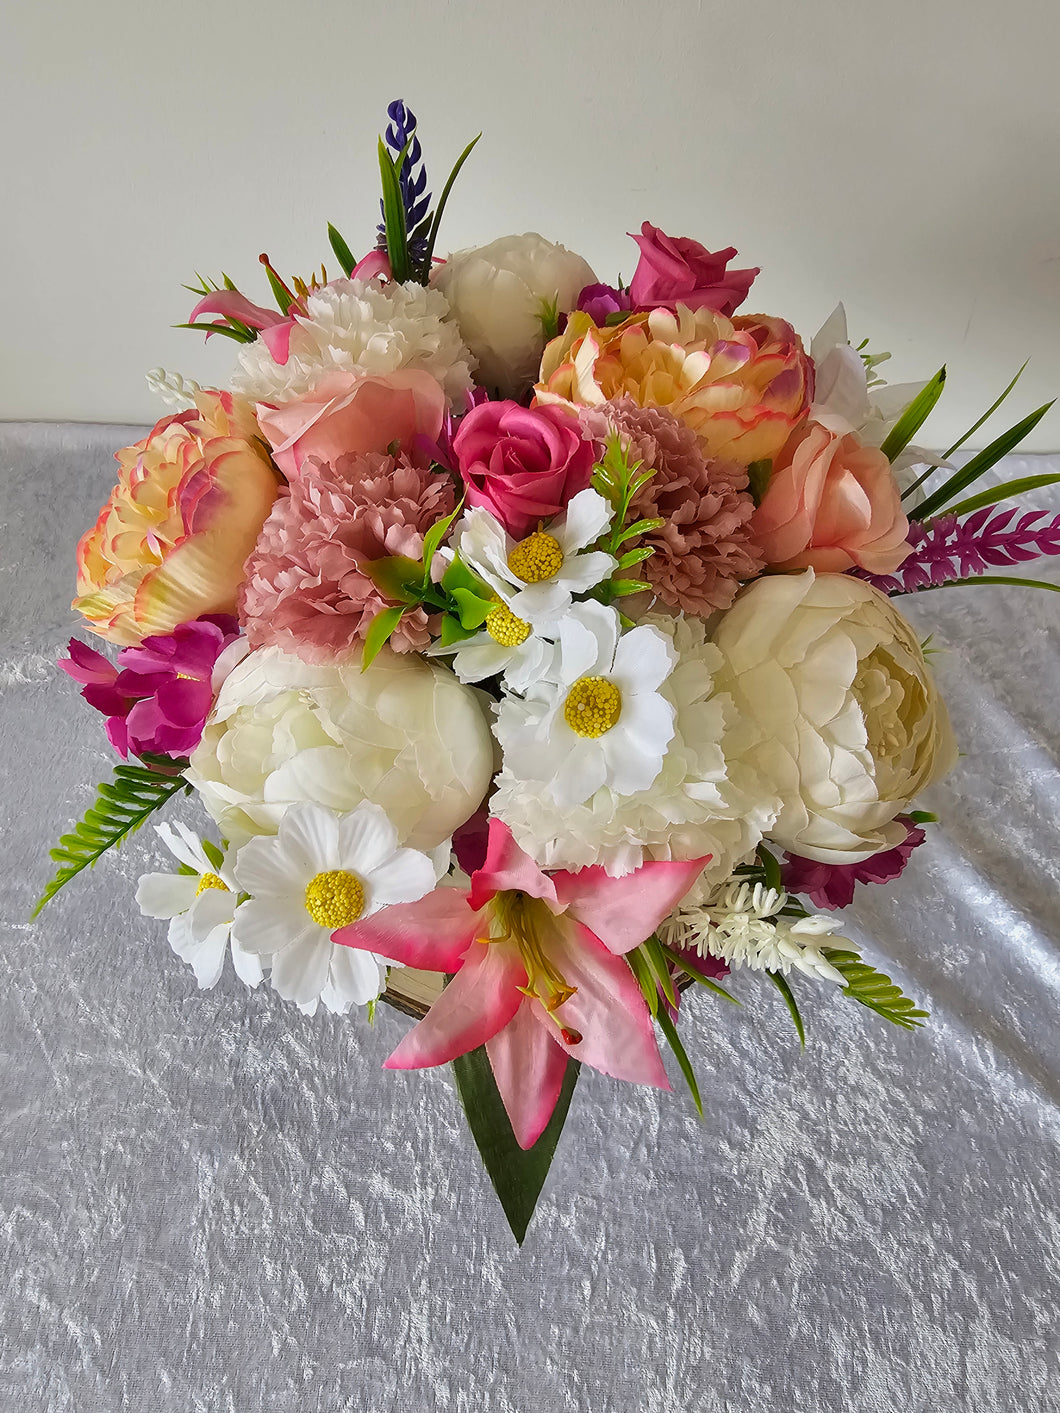 Pink and White Mixed Silk Floral Grave Pot / Memorial Flowers